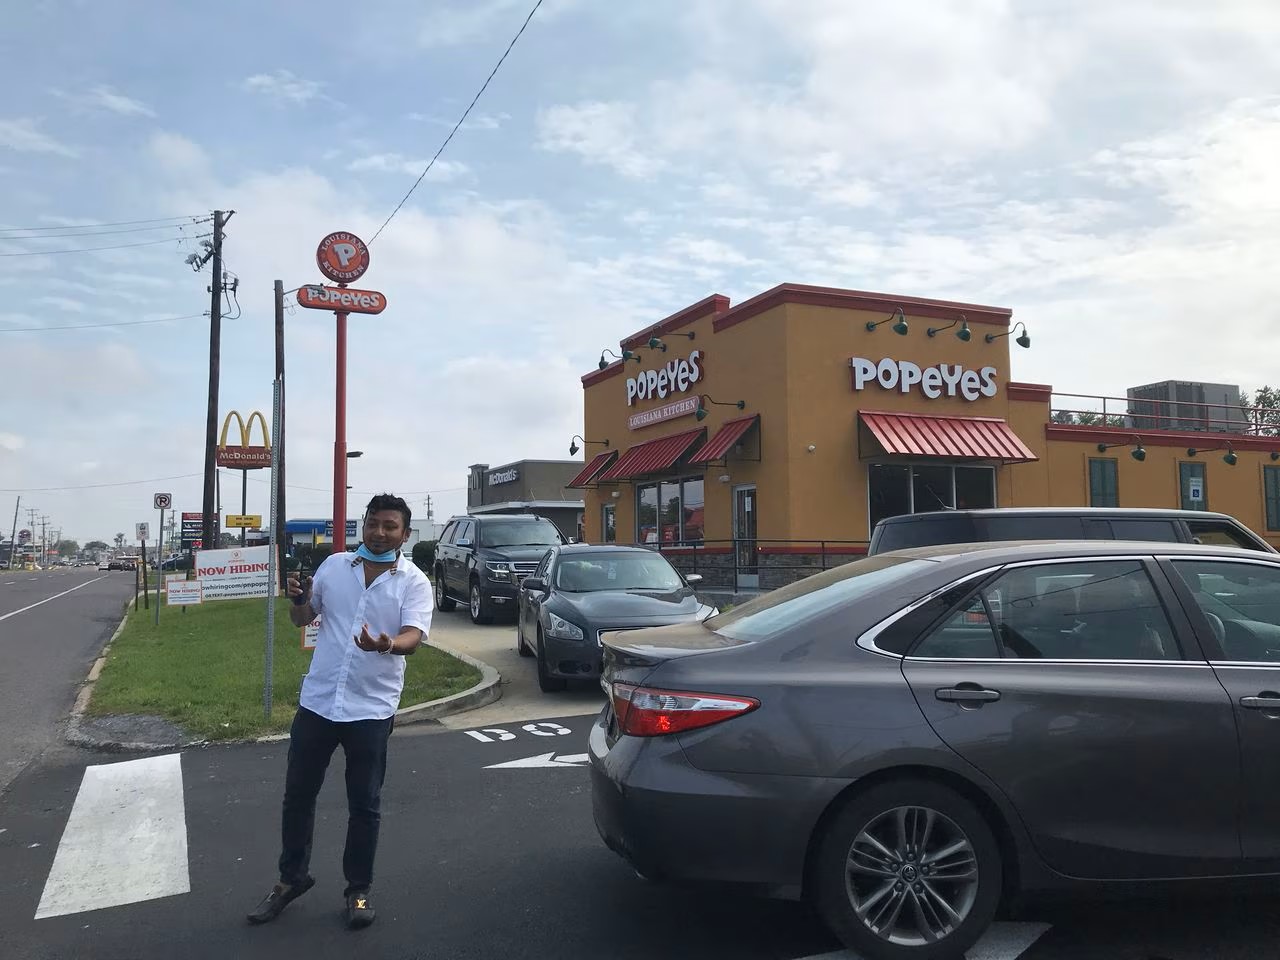 A court order has been filed against the owners of a Popeyes restaurant 4601 Jonestown Road in Lower Paxton Township. The U.S. Department of Labor claims that one of the managers obstructed an investigation.